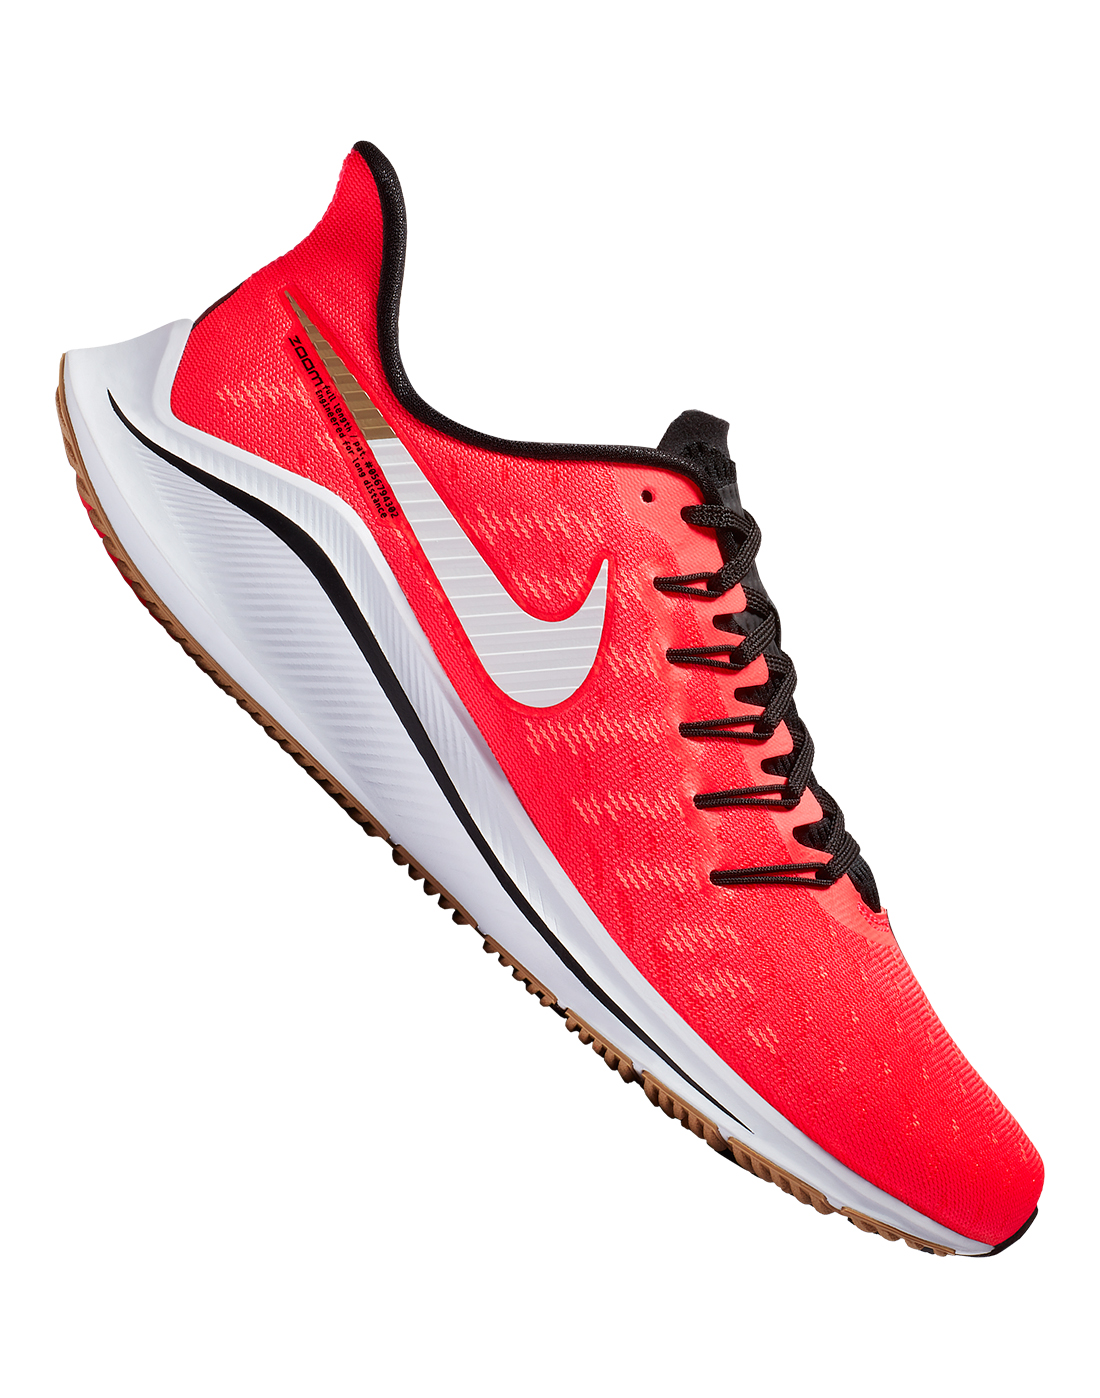 Men's Red Nike Air Zoom Vomero 14 